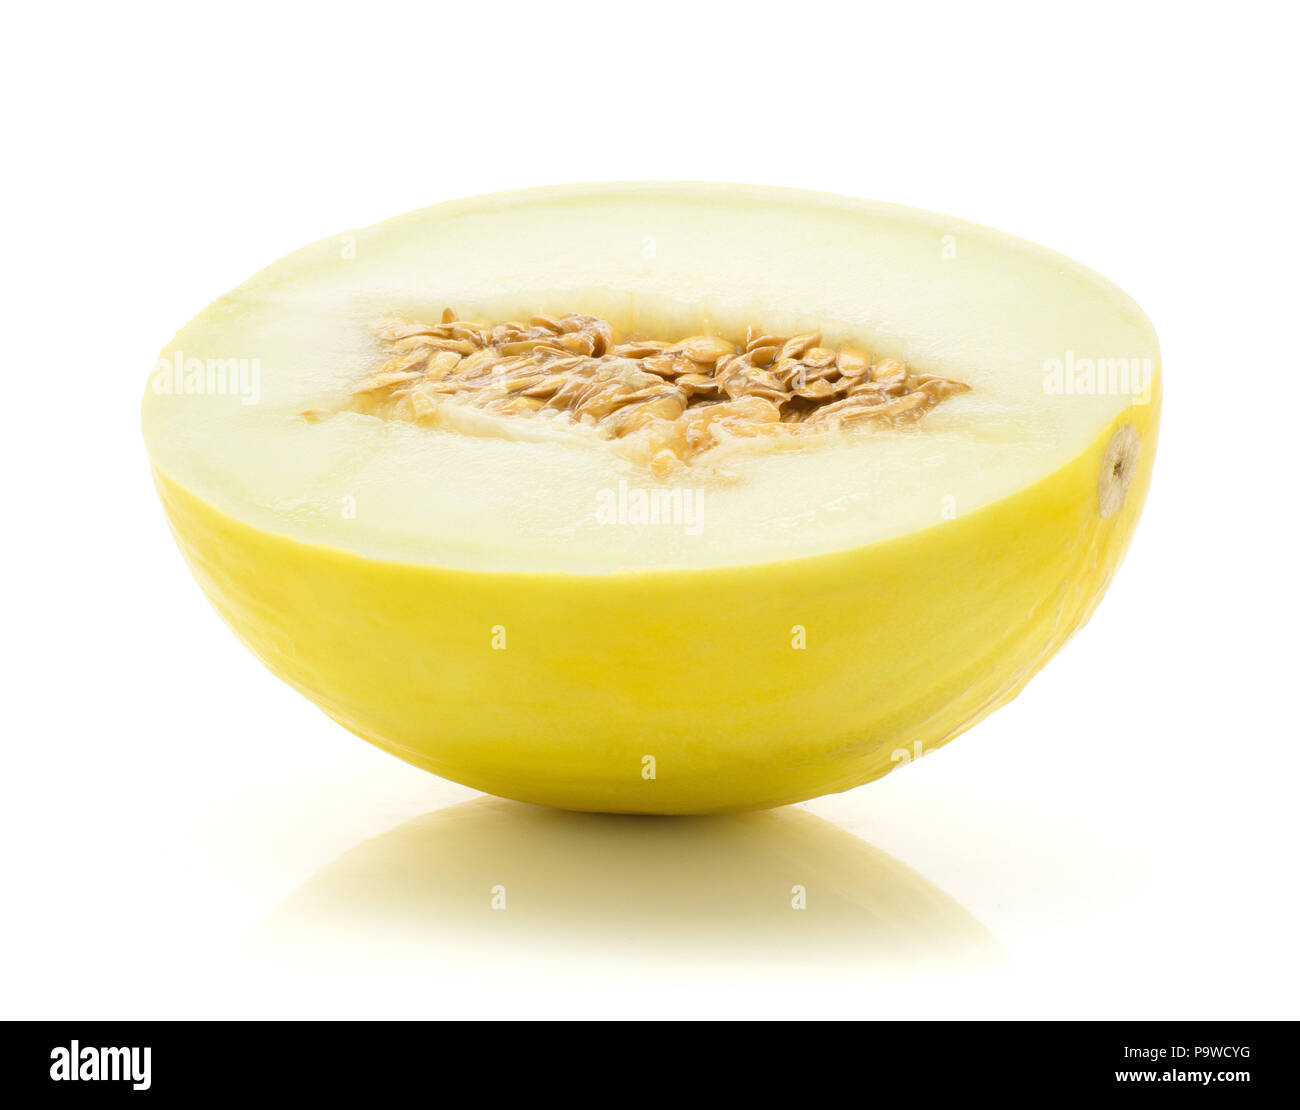 One yellow honeydew melon half with seeds isolated on white background Stock Photo